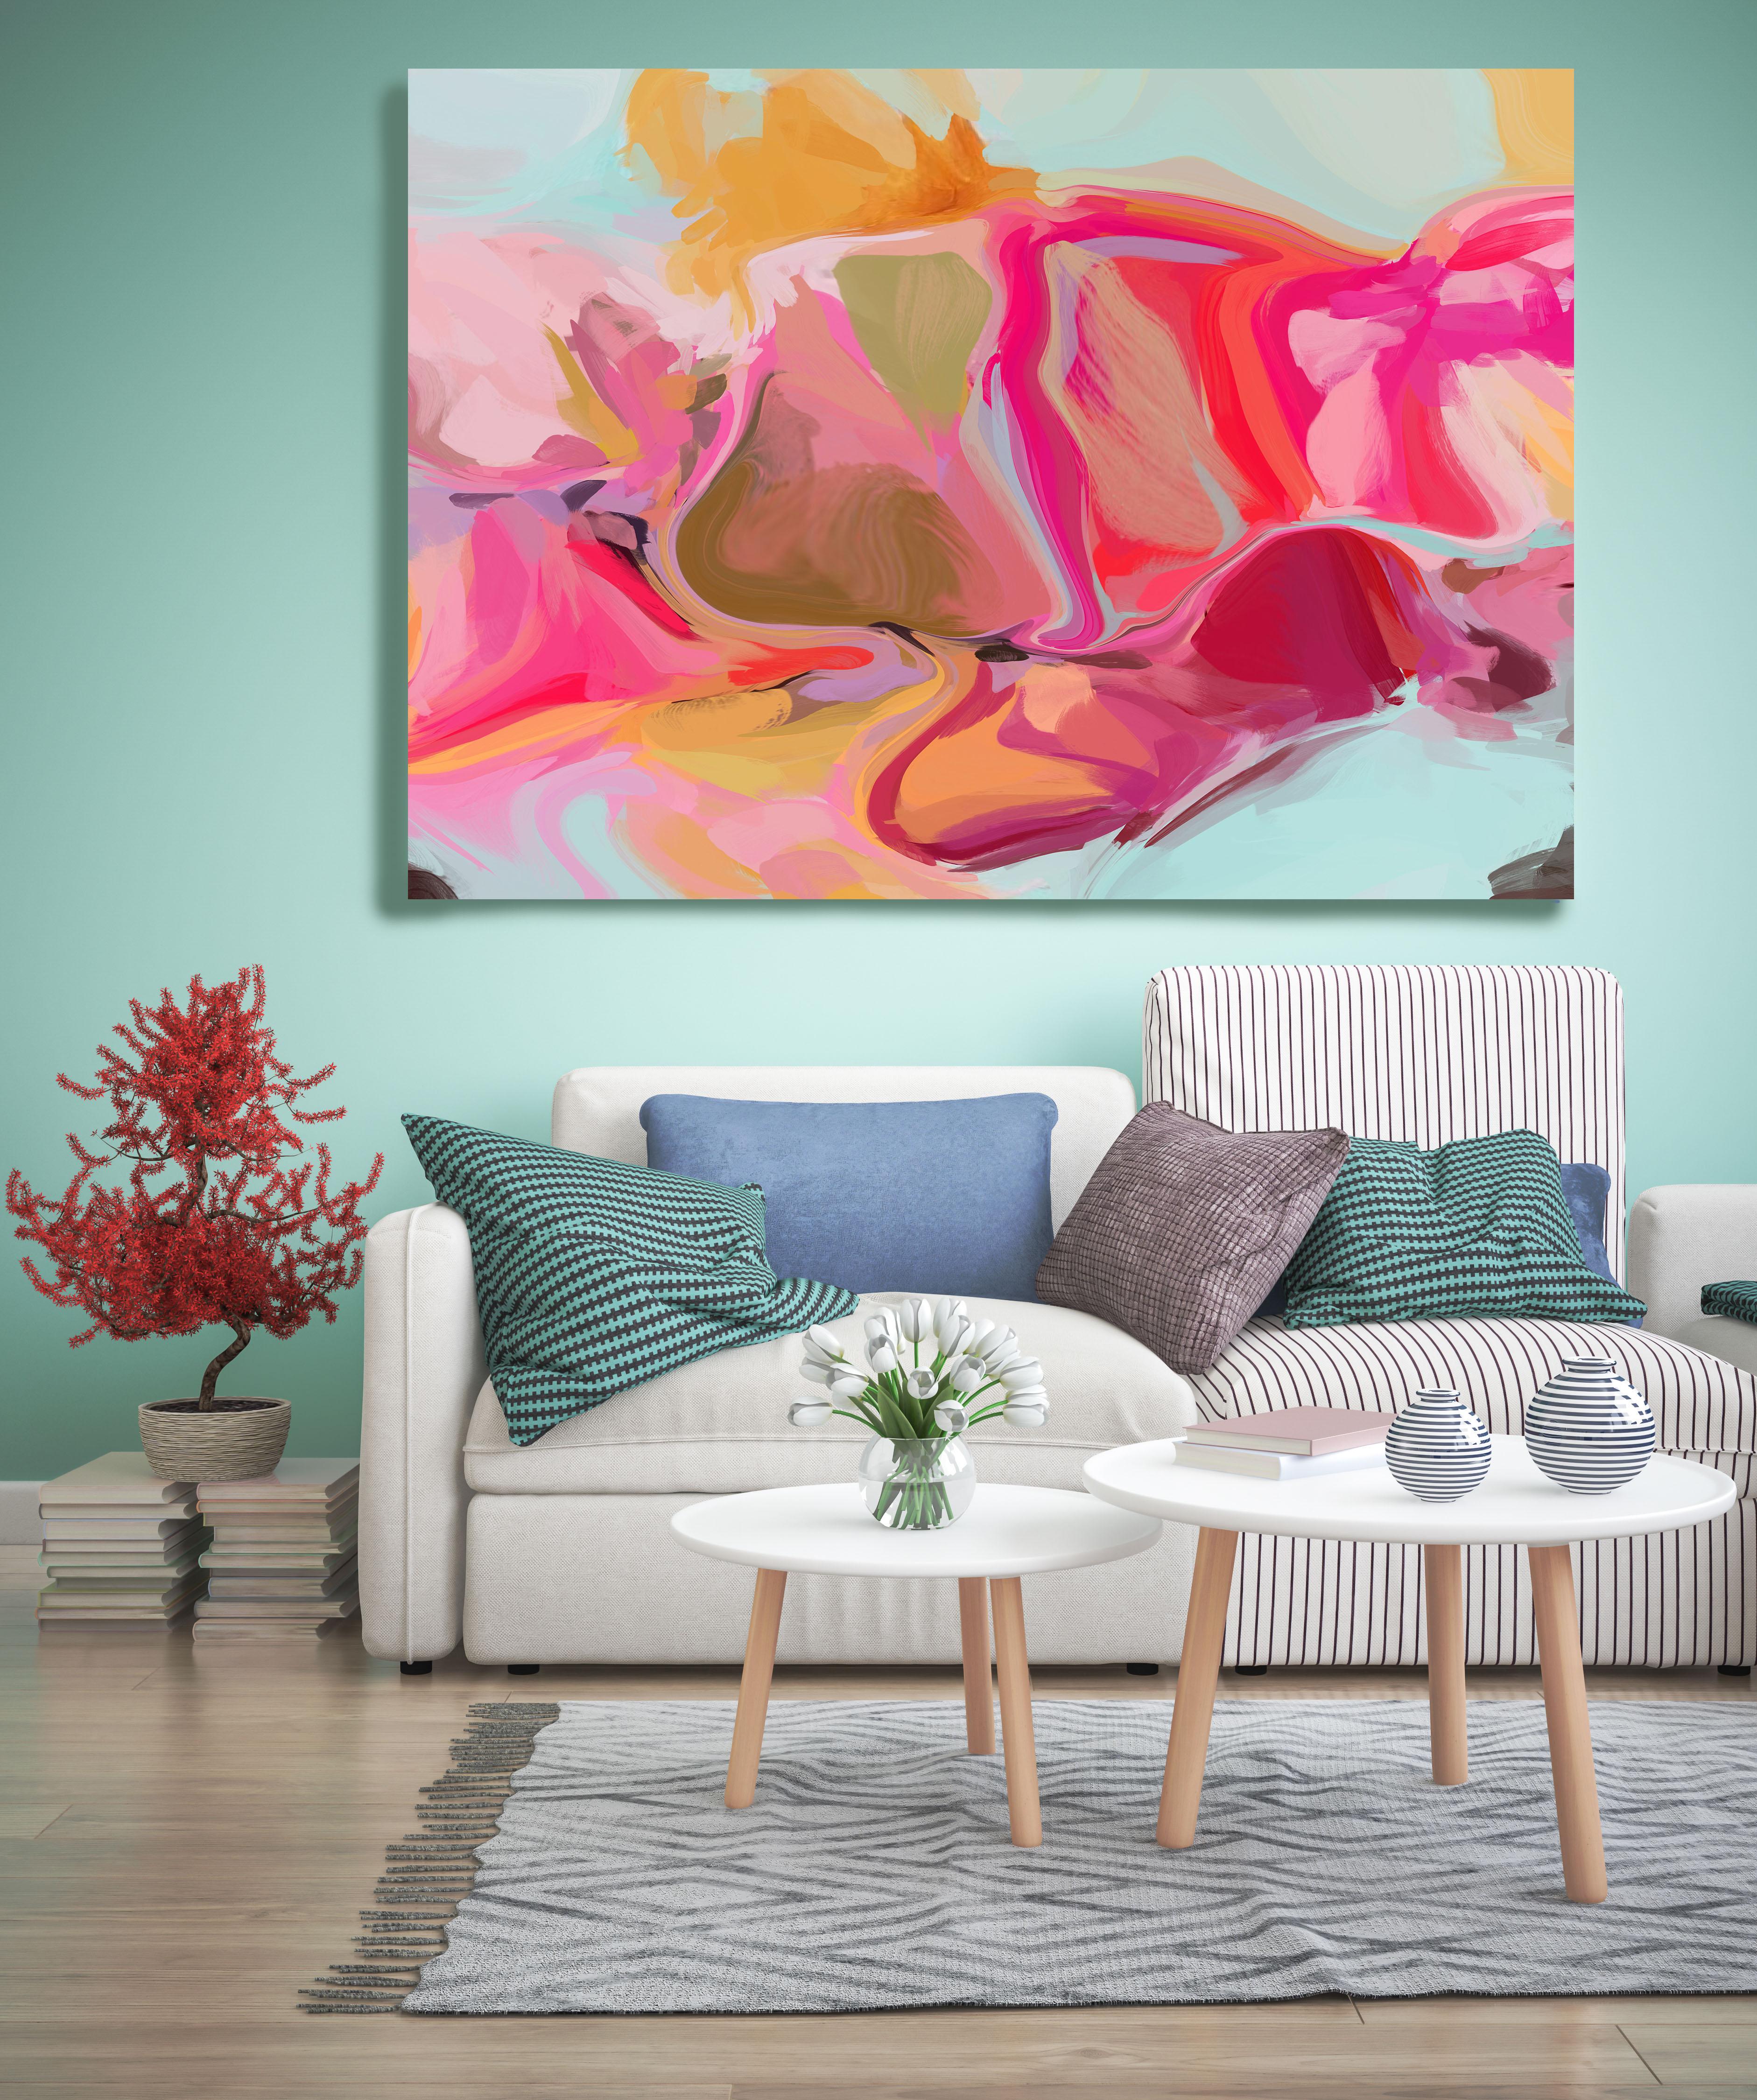 Pink Painting Mixed Media Canvas 60x40" The Wind Moves, Contemporary